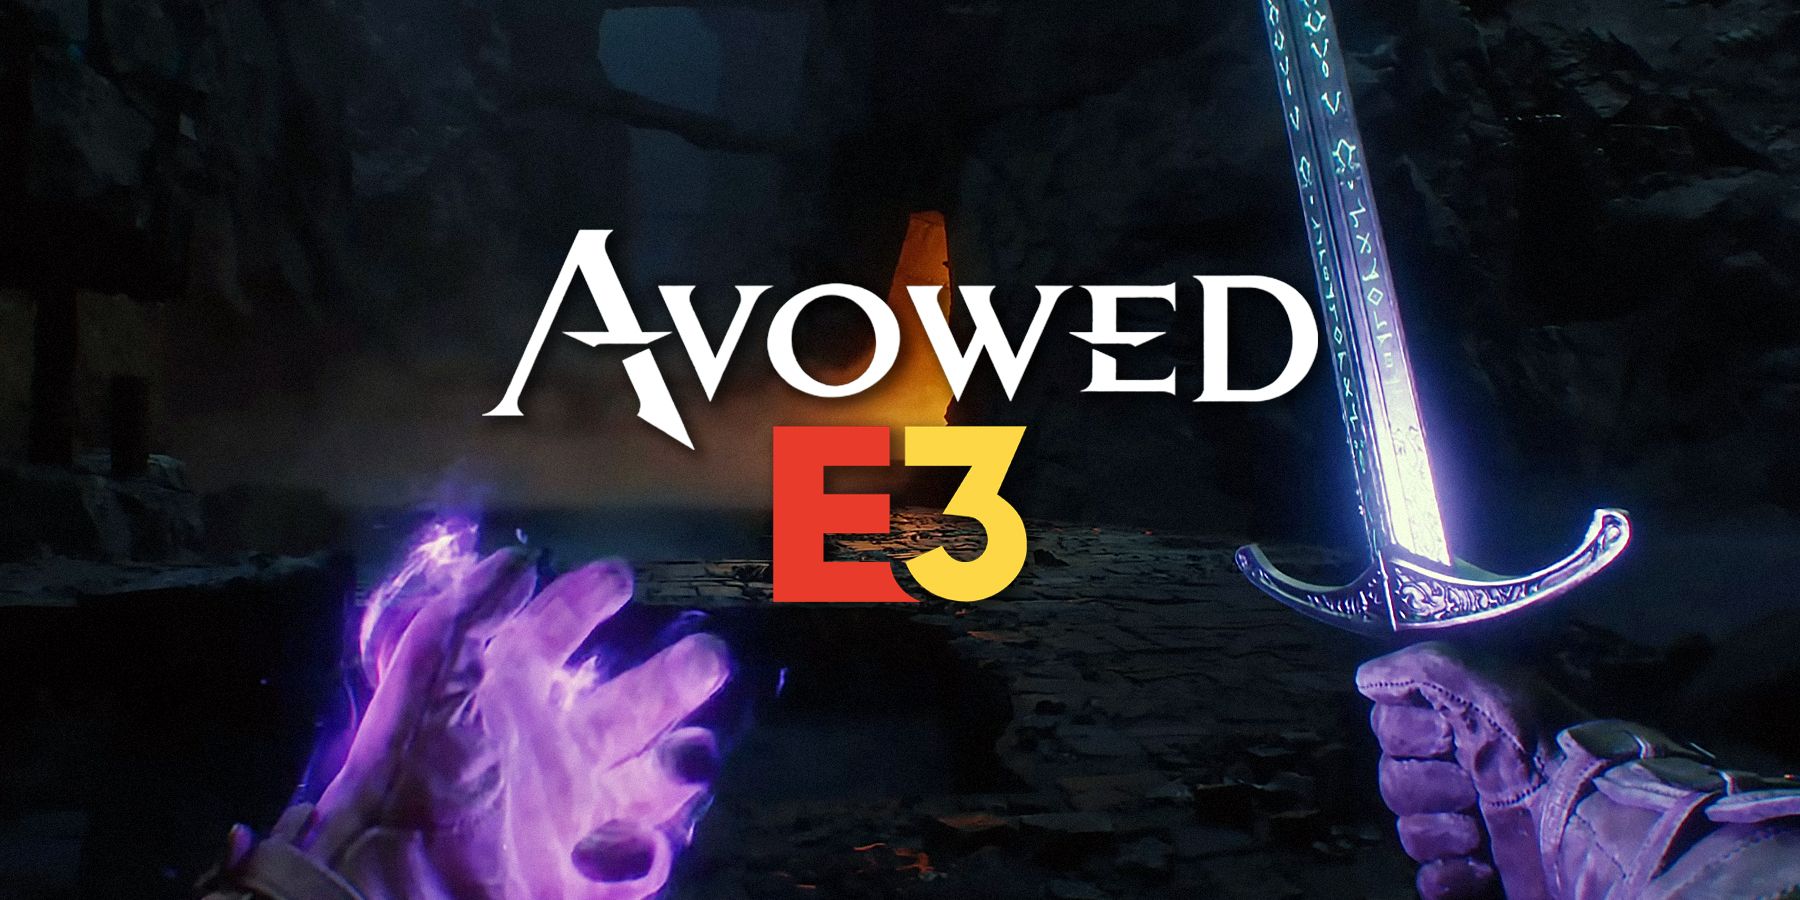 How Likely is Avowed to Show Up at E3, Big Gaming Events in 2023?